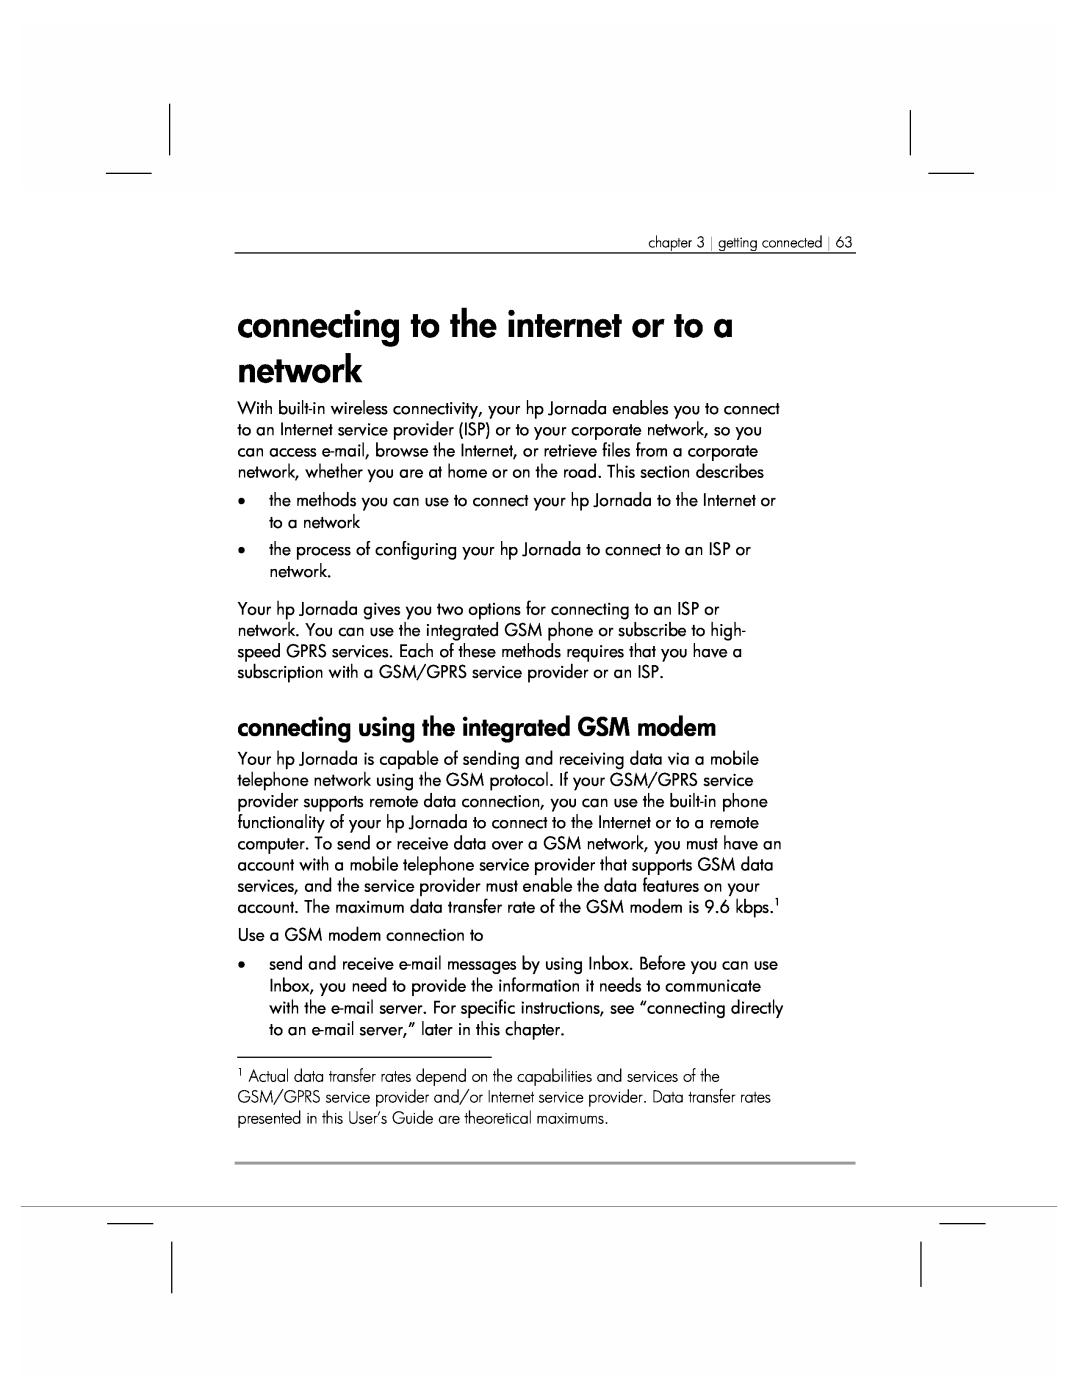 HP 920 manual connecting to the internet or to a network, connecting using the integrated GSM modem 